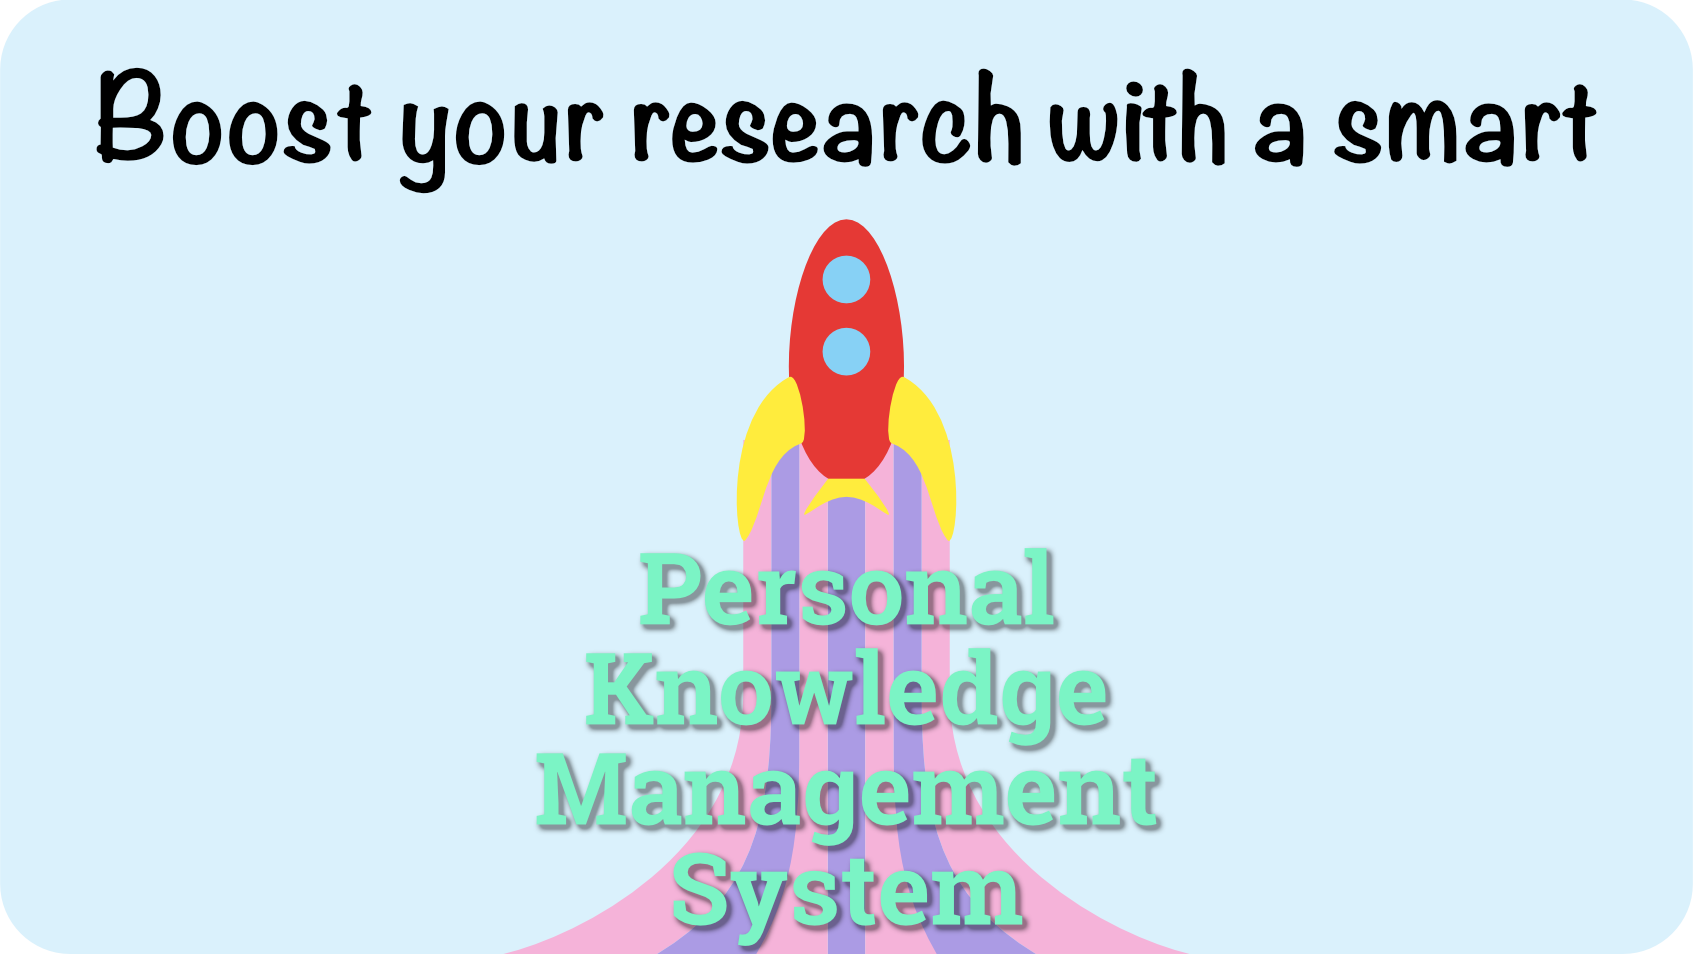 Boost your research with a smart personal knowledge management system